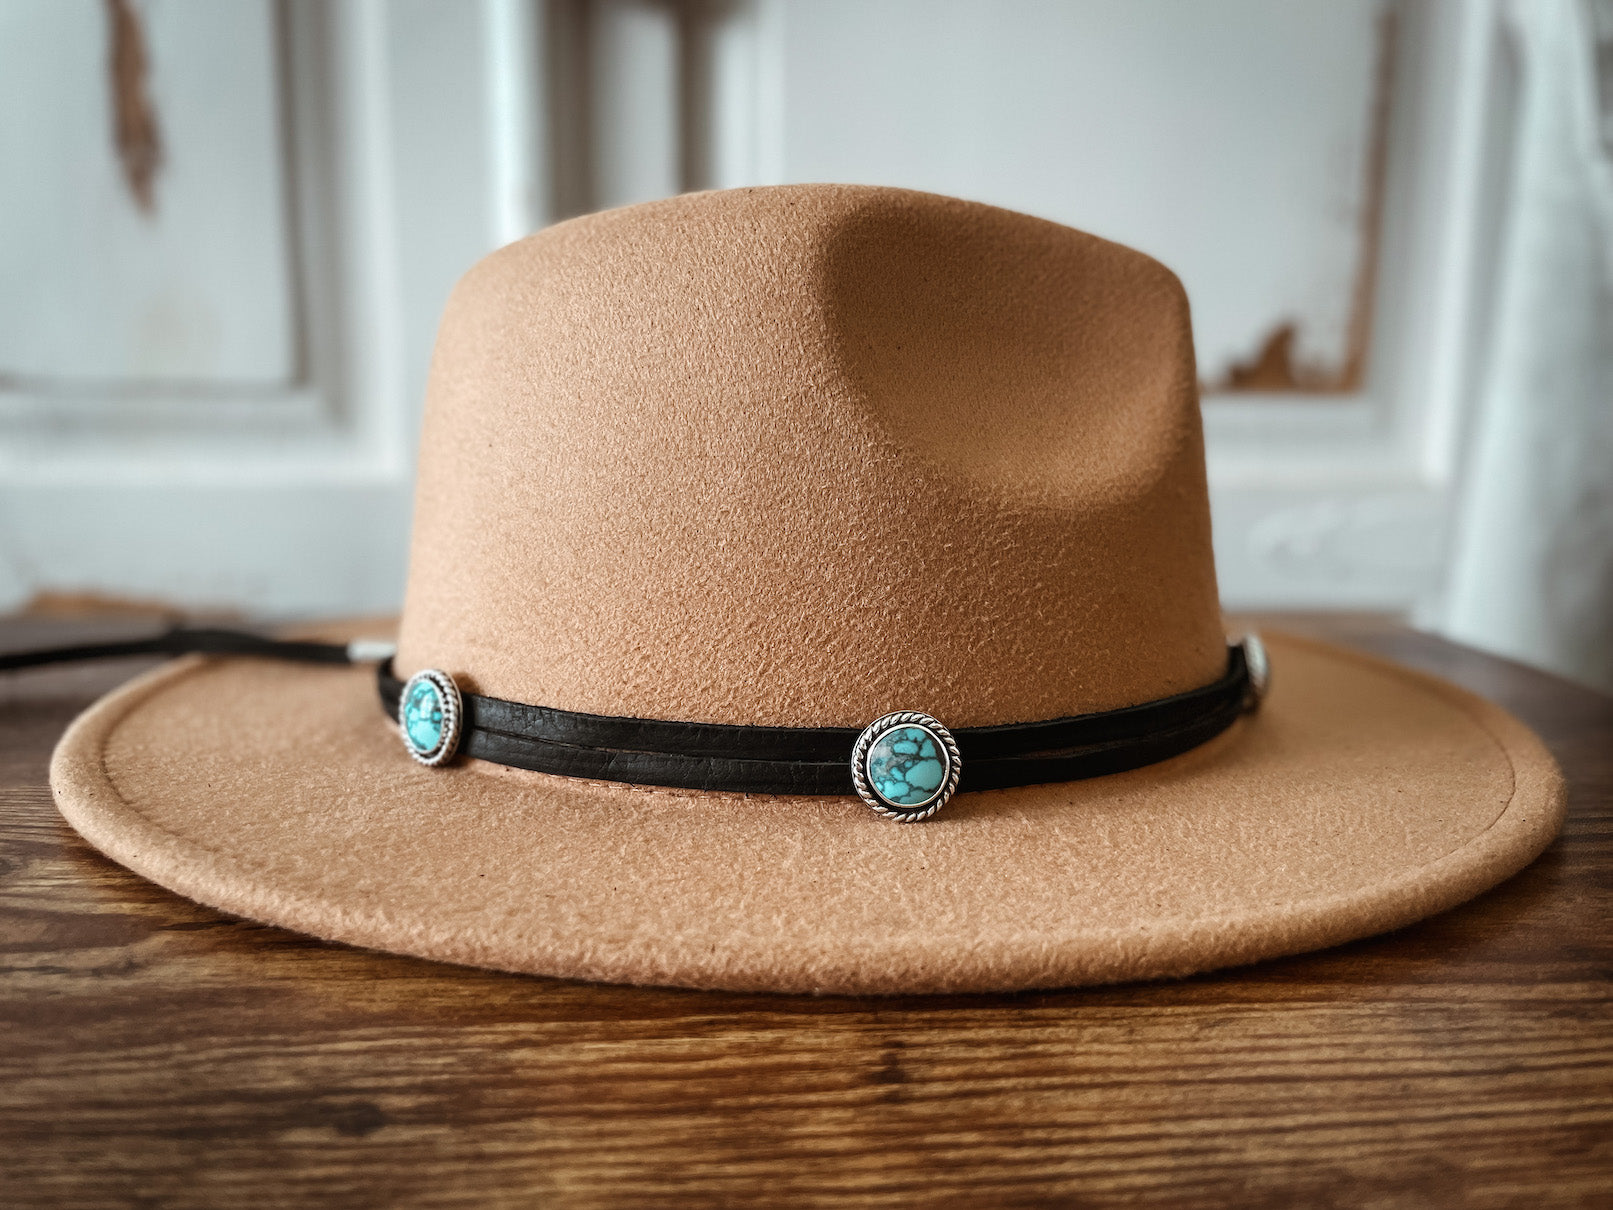 Cream colored hat with dark leather hatband wrap featuring round turquoise stones set in sterling silver.